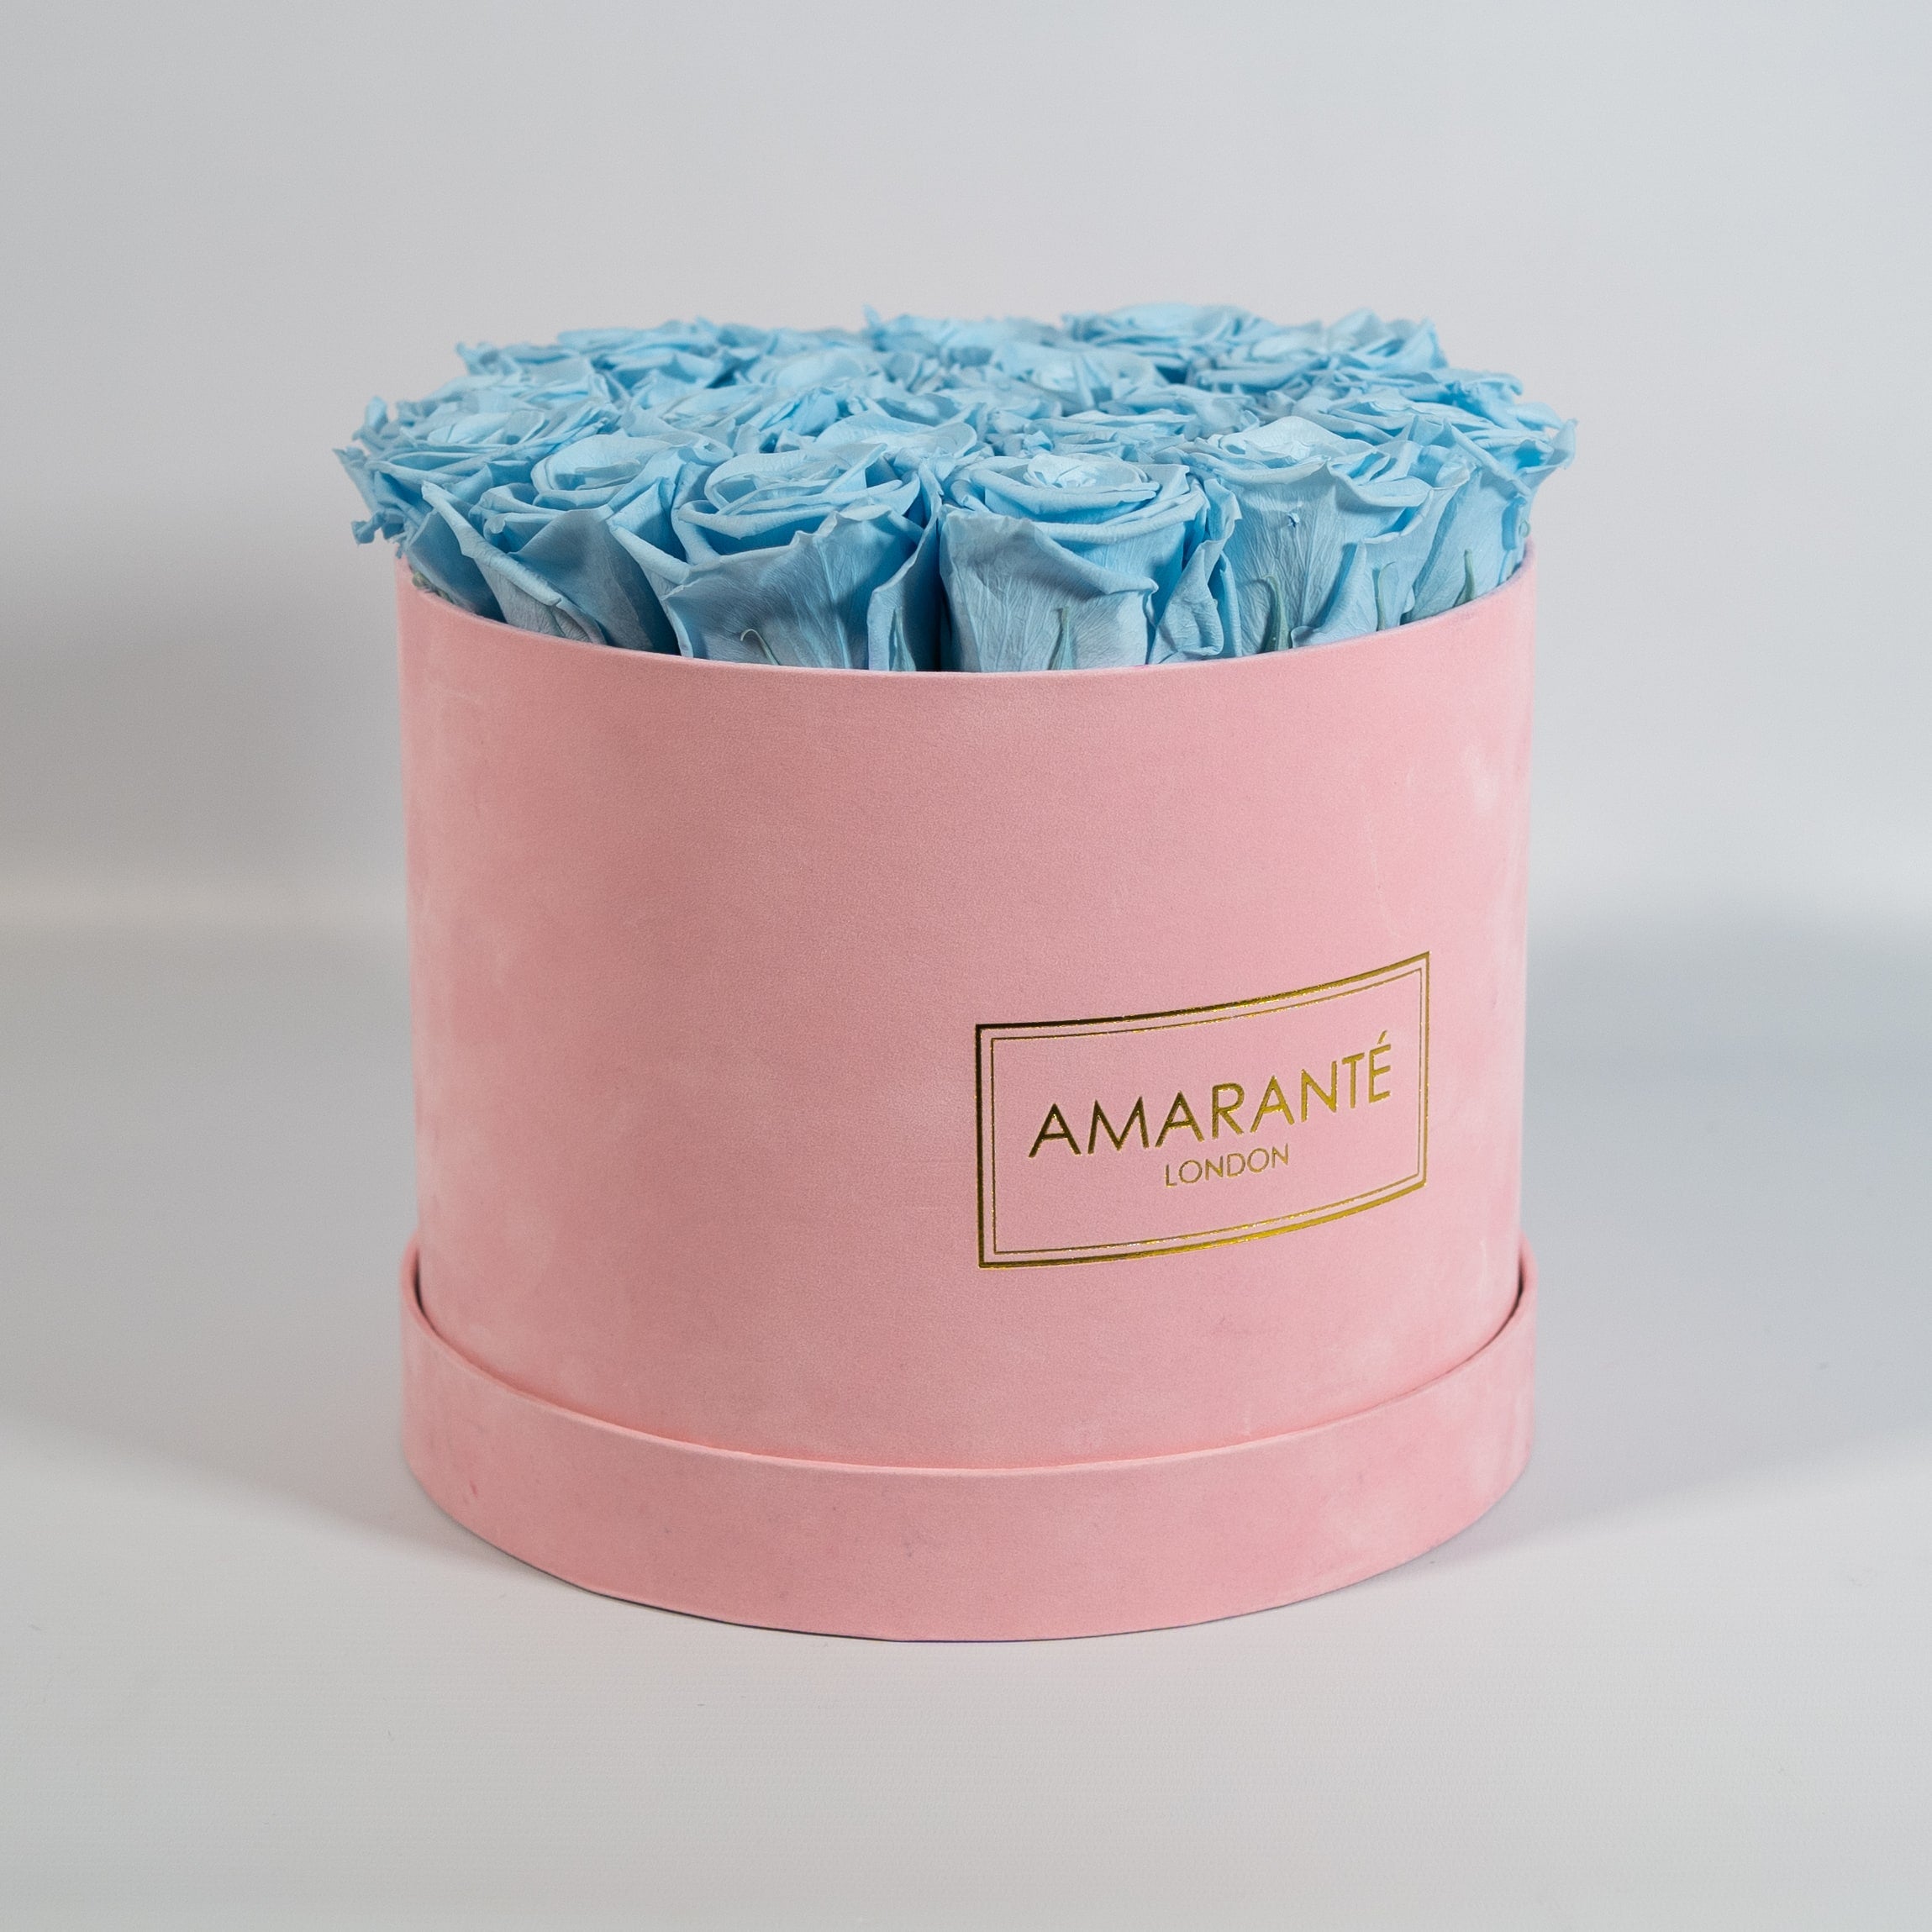 Delicate light blue Roses encompassed in a blushing pink box 